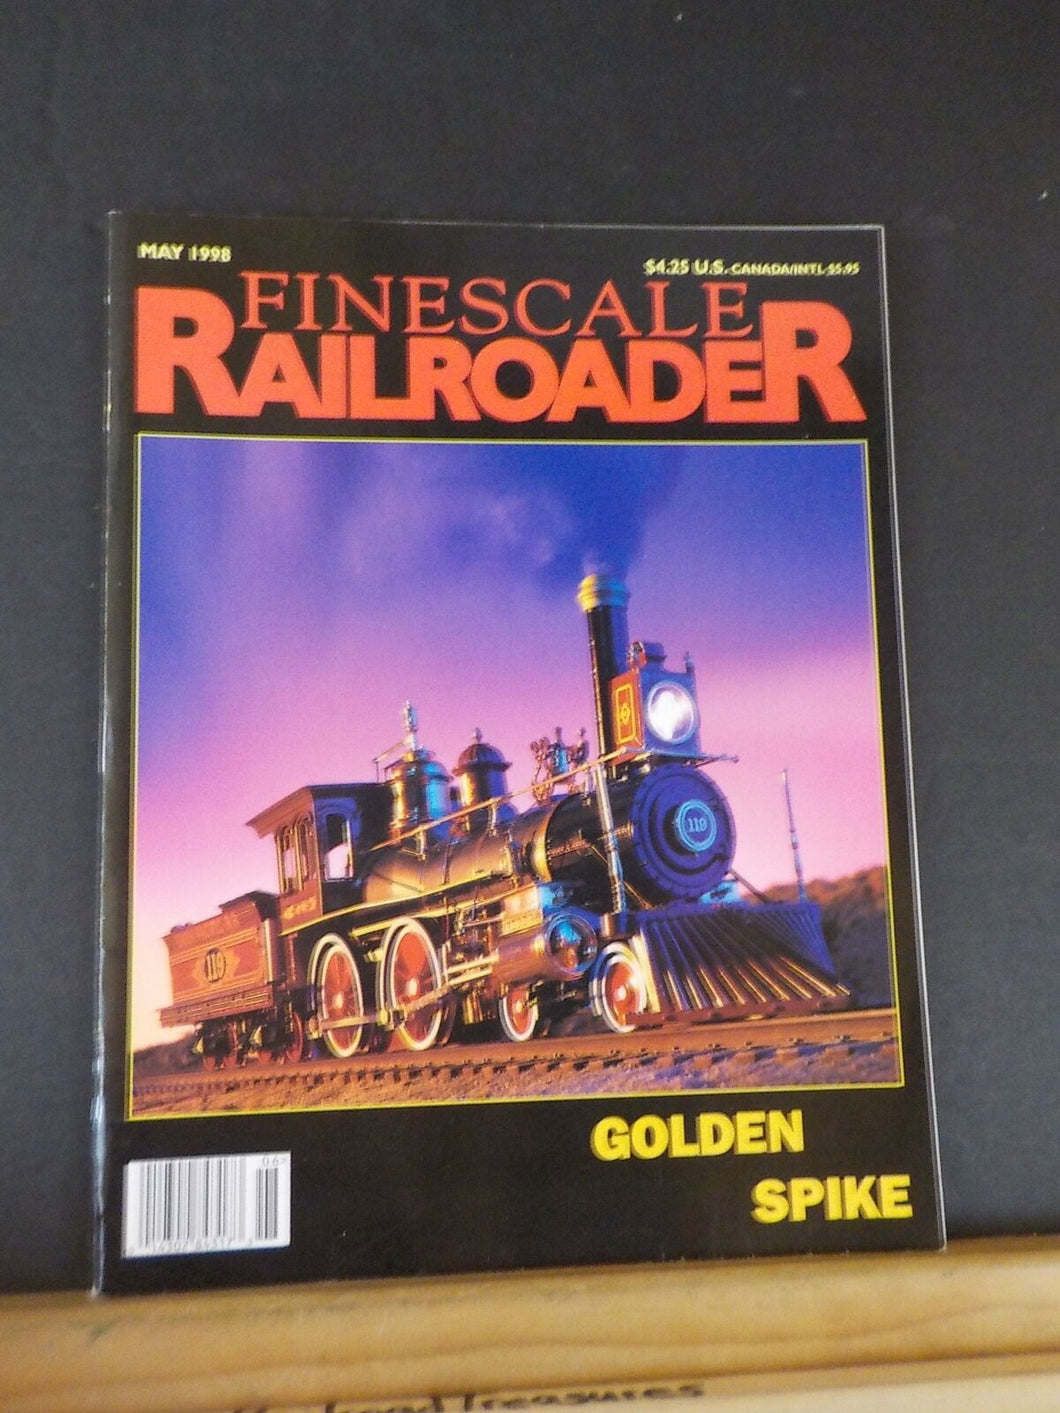 Finescale Railroader 1998 May  Golden Spike South Pacific Coast PRR bark flat